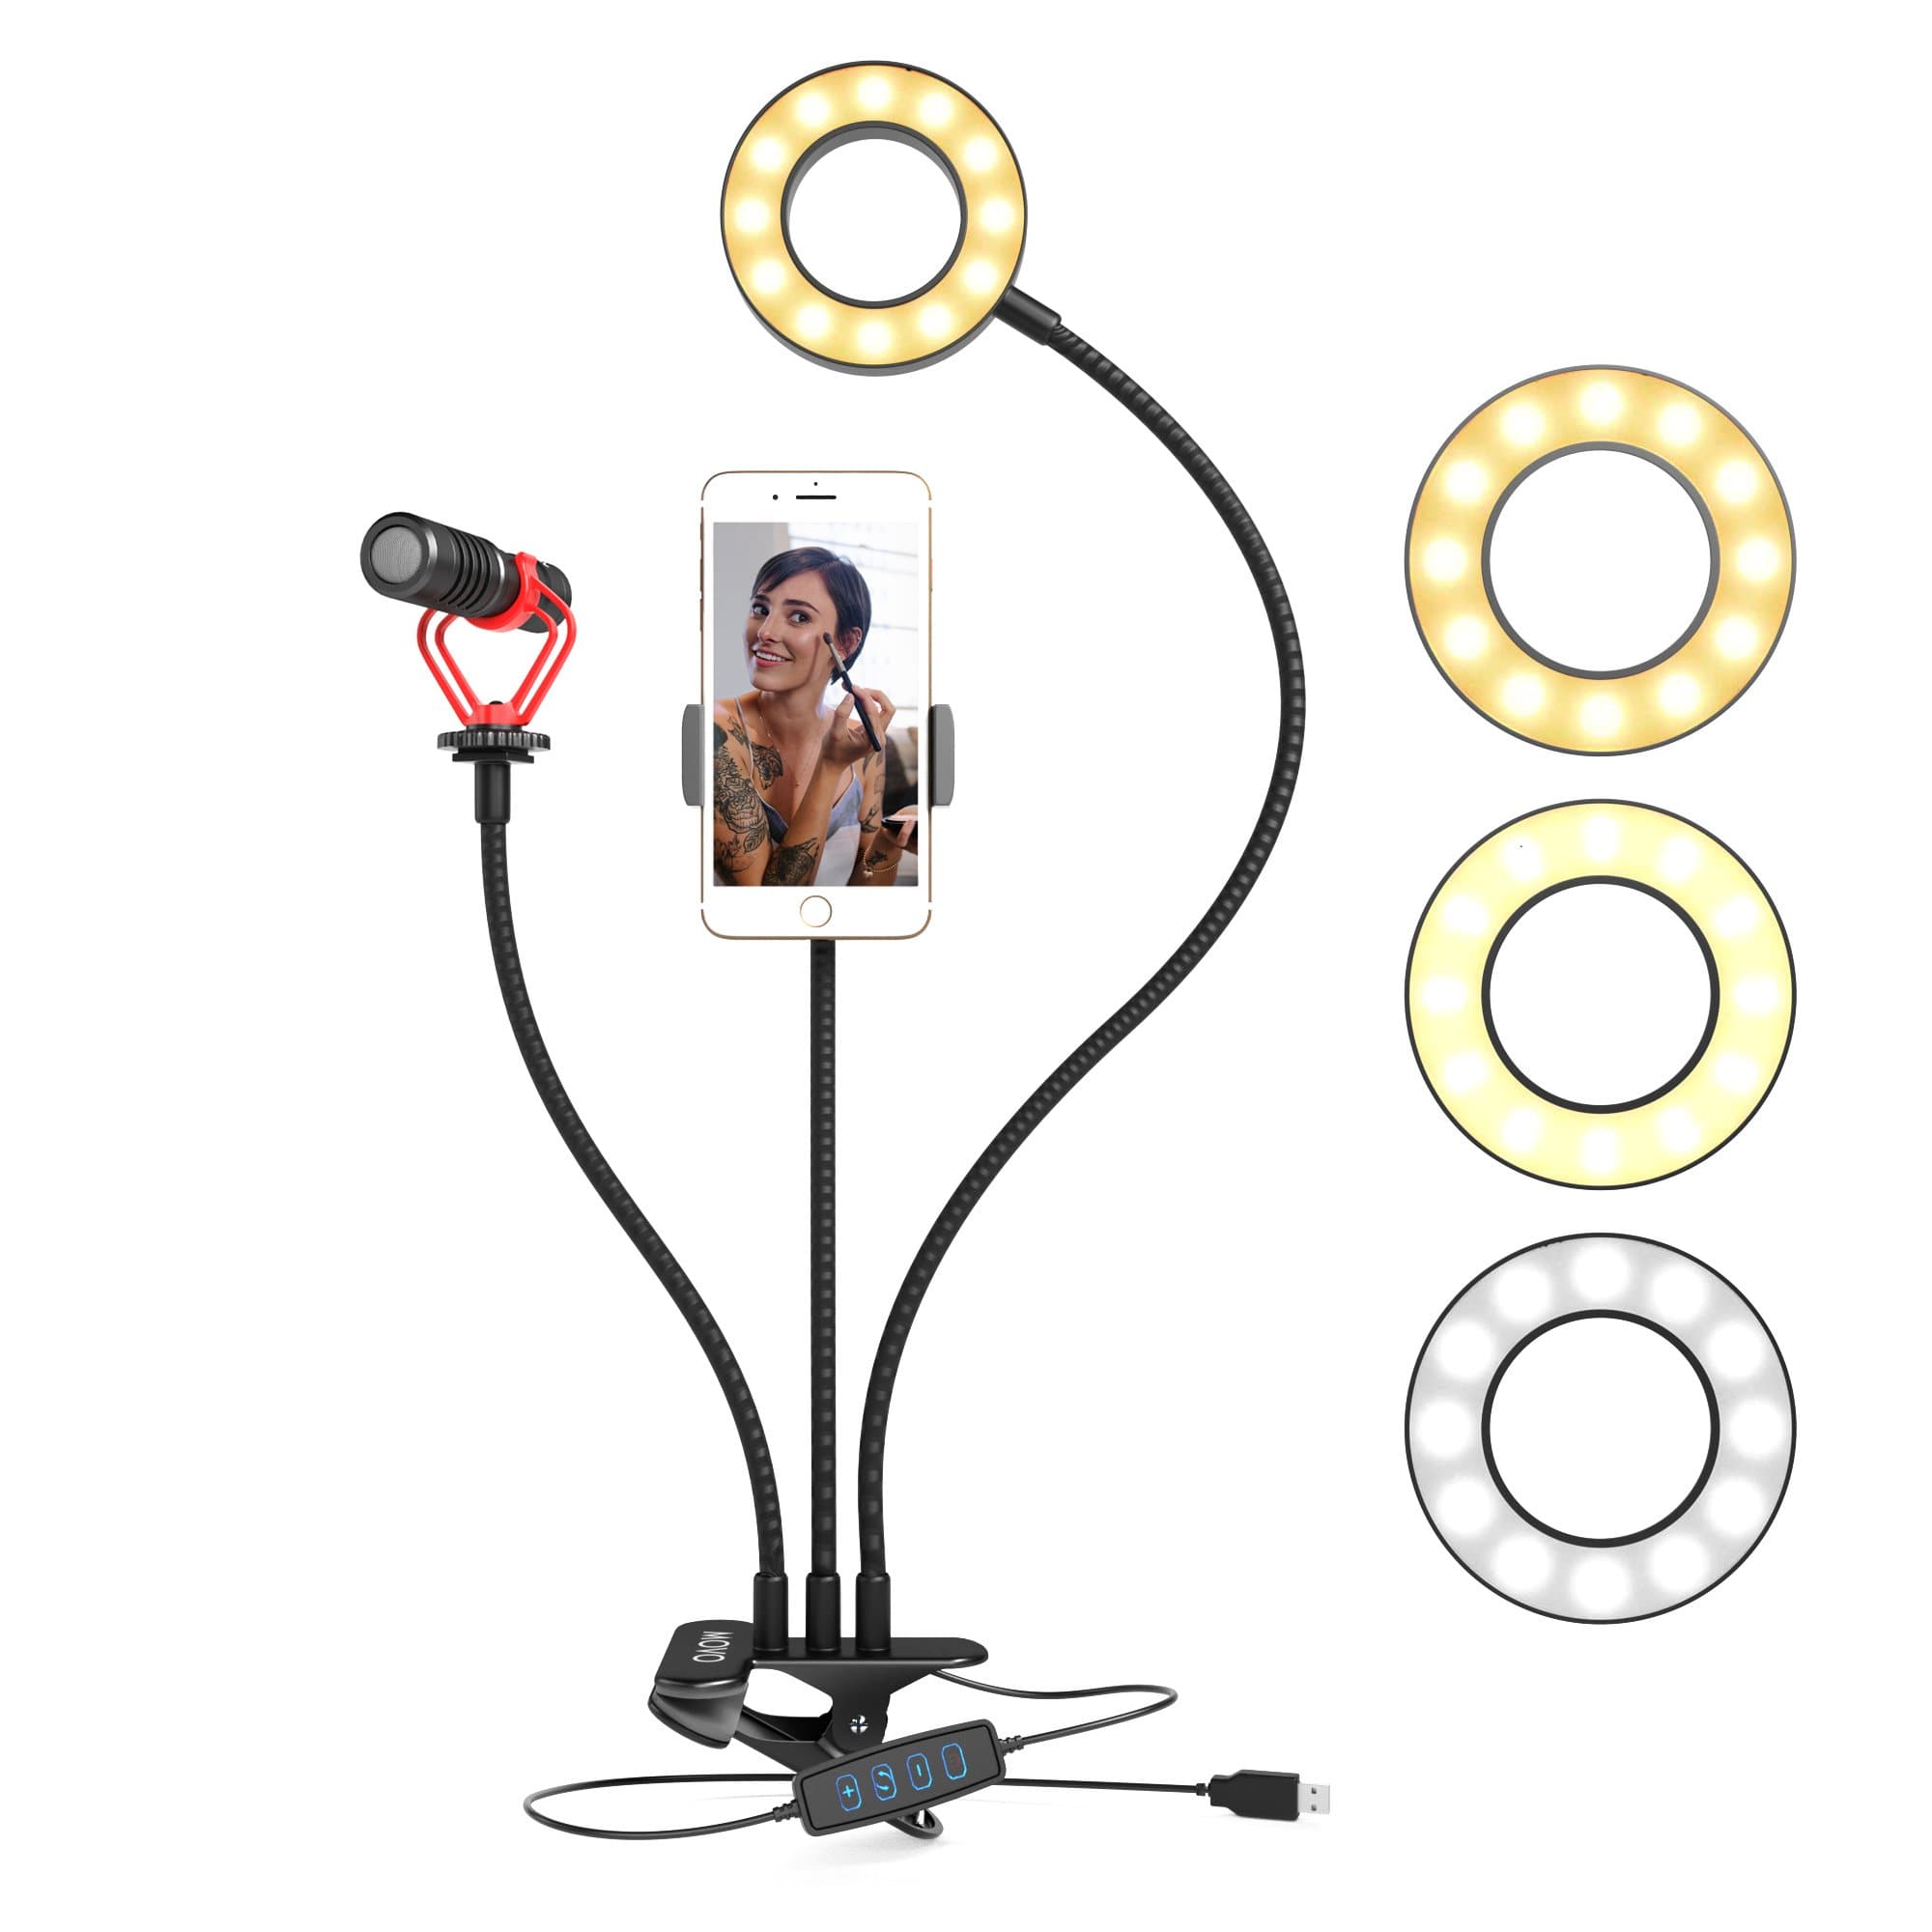 Wholesale 10 inch Selfie Ring Light with Table Top Stand & Cell Phone Holder  for Live Stream, Makeup, YouTube Video, Photography TikTok, & More  Compatible with Universal Phone (Black)